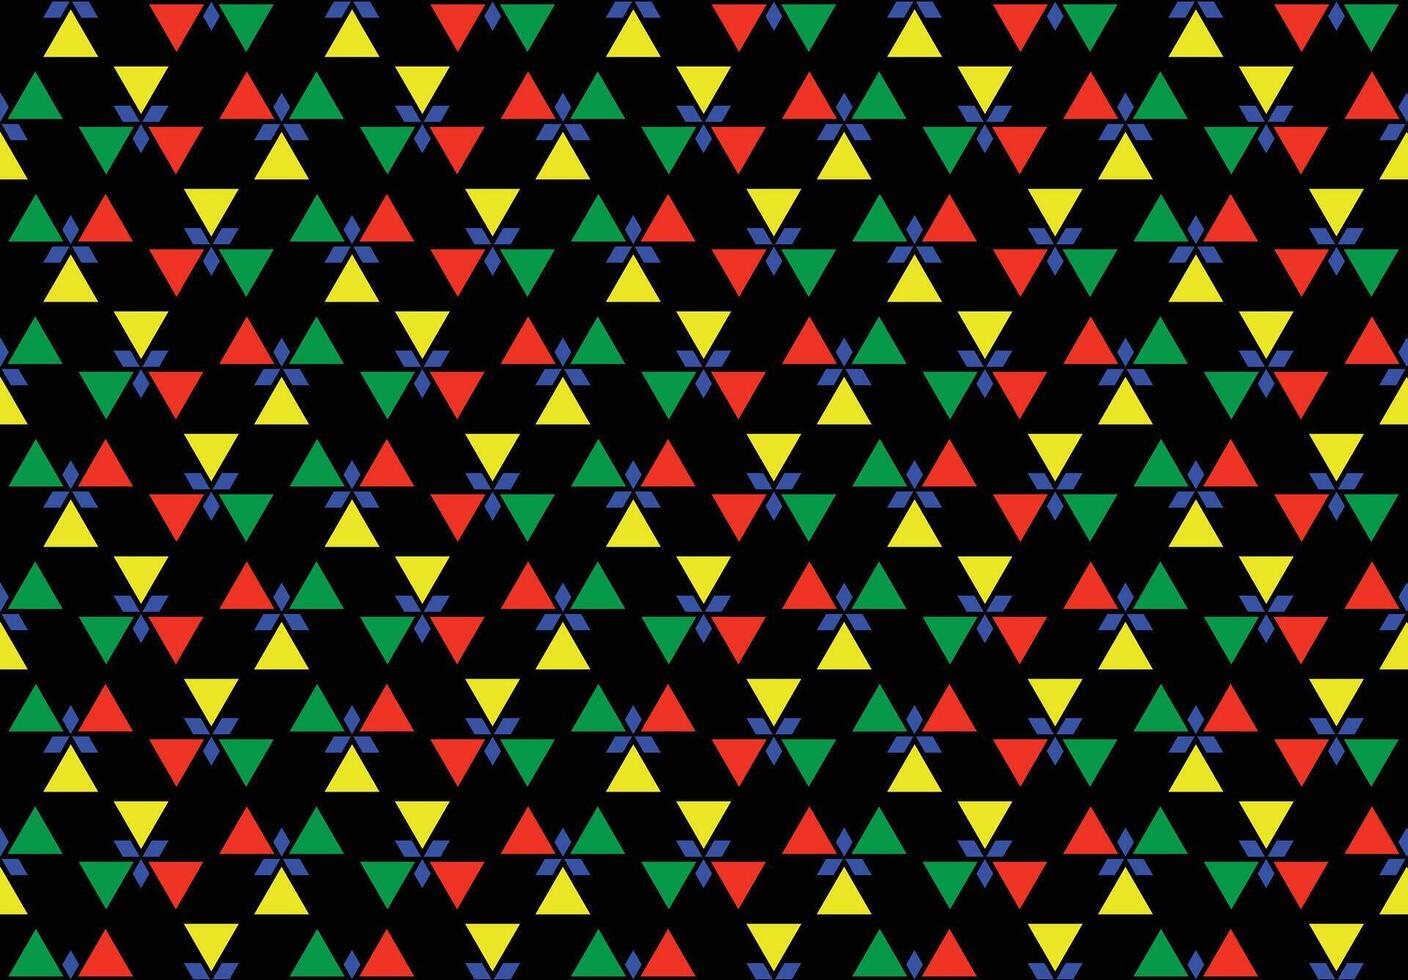 Illustration wallpaper, Abstract Geometric Style. Repeating Sample triangle color on black background. vector